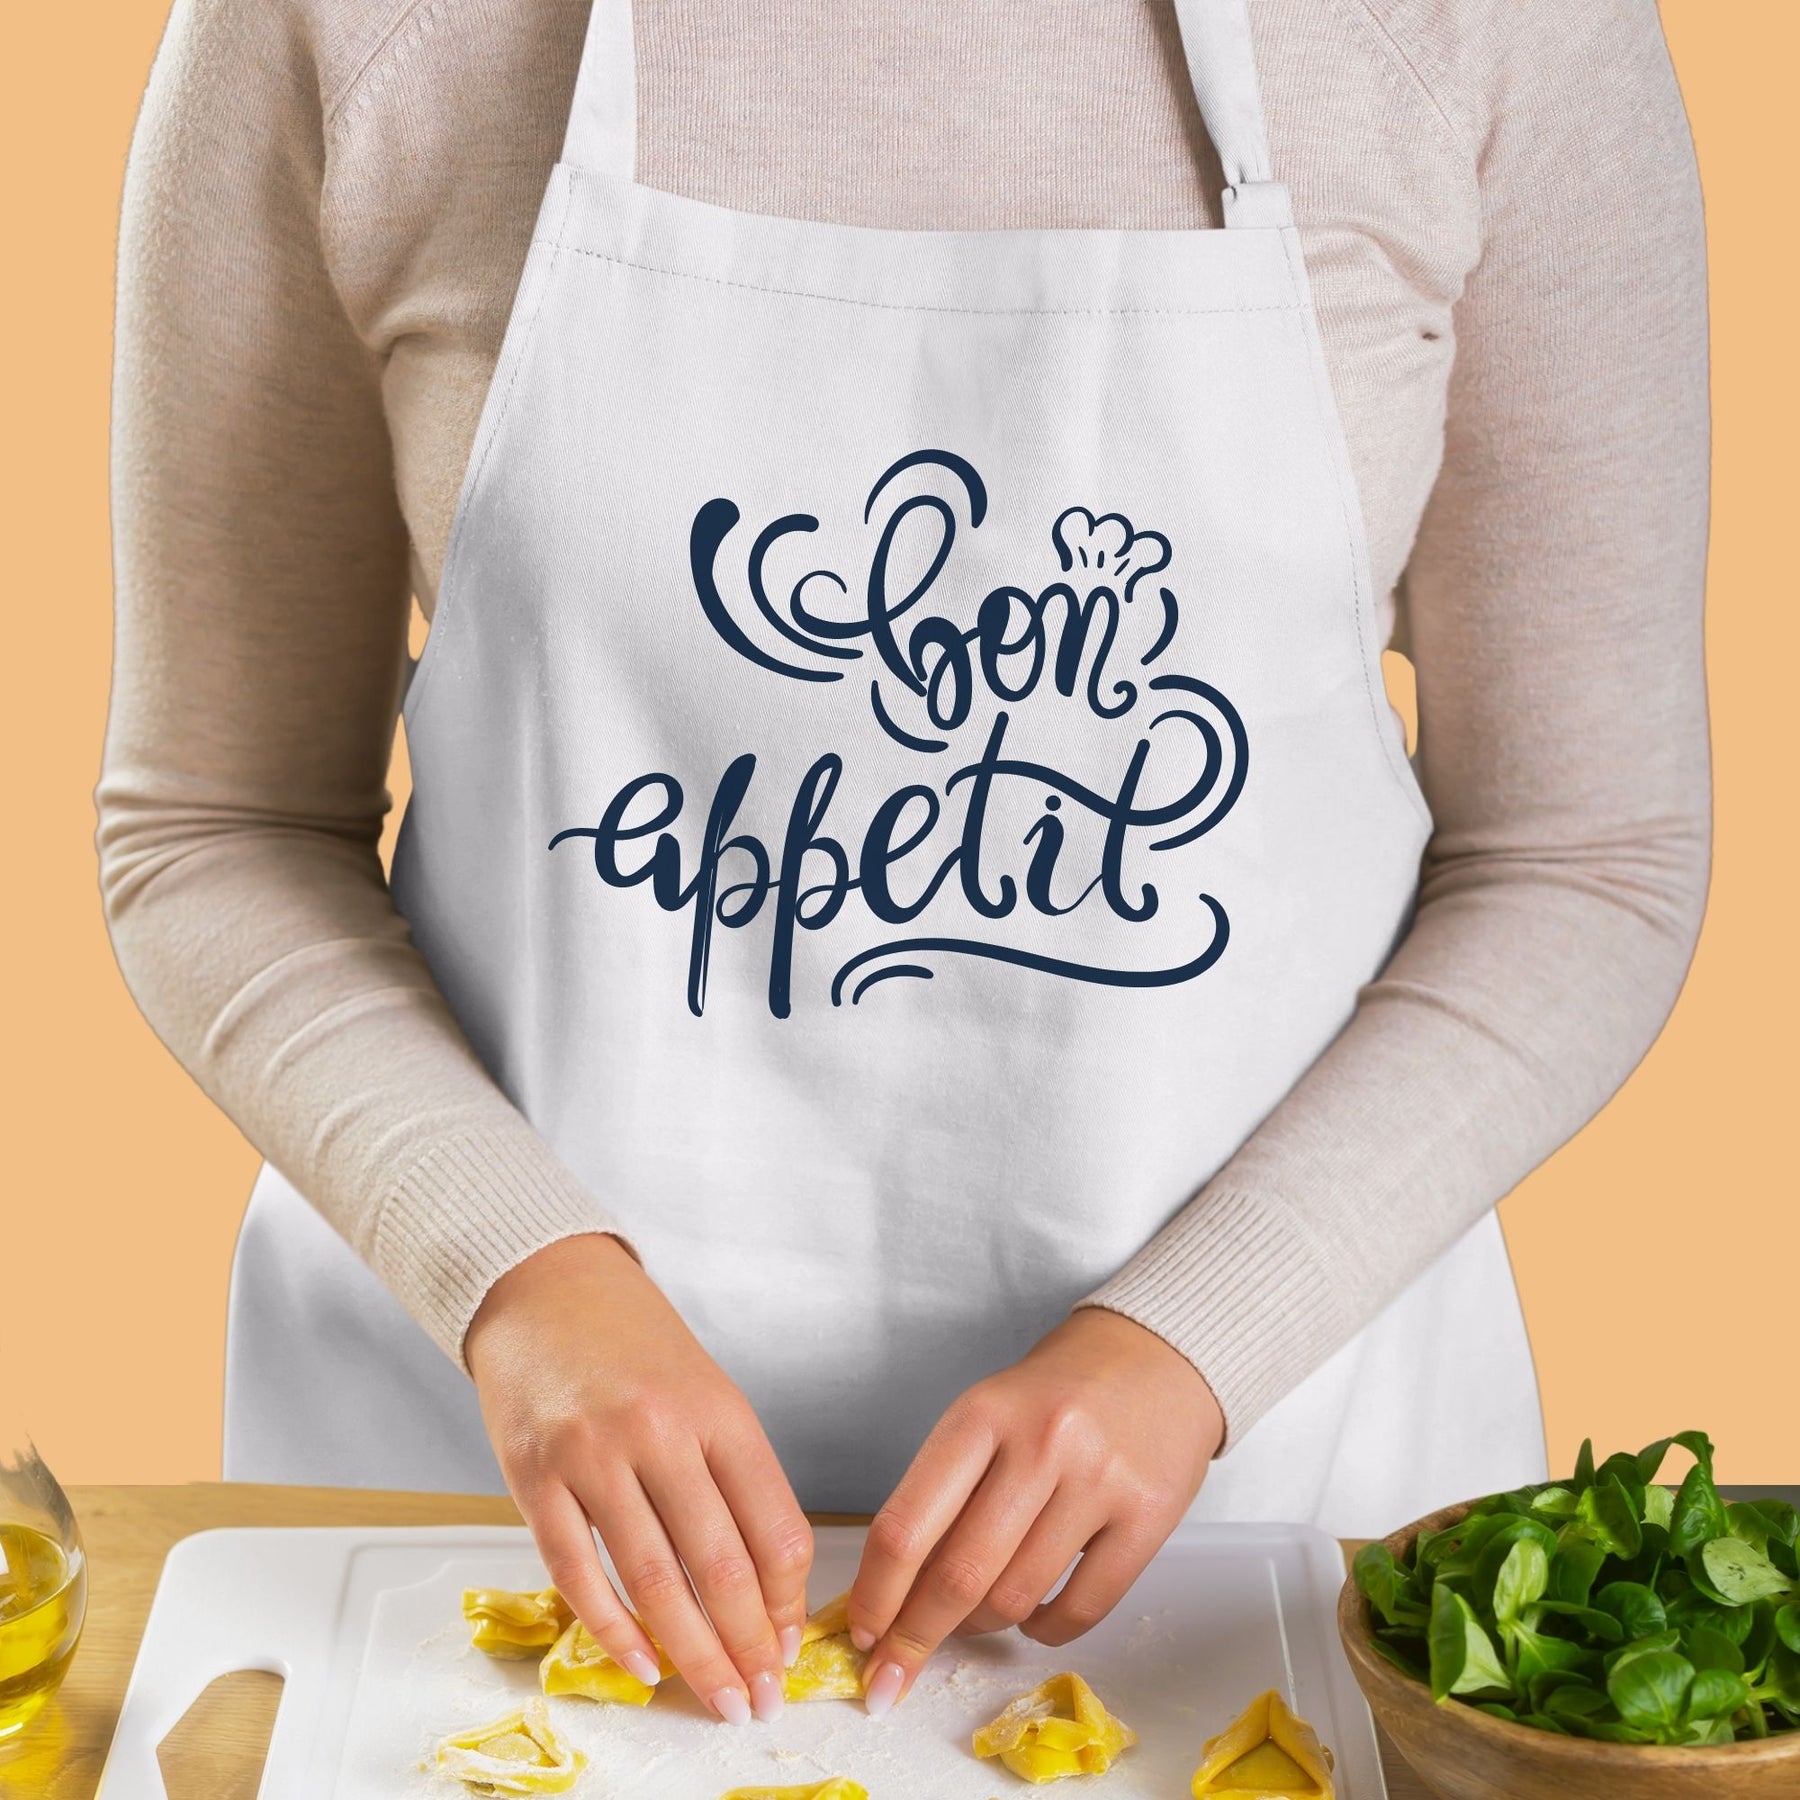 Stand Back, I'm Gonna Cook Funny Kitchen Apron